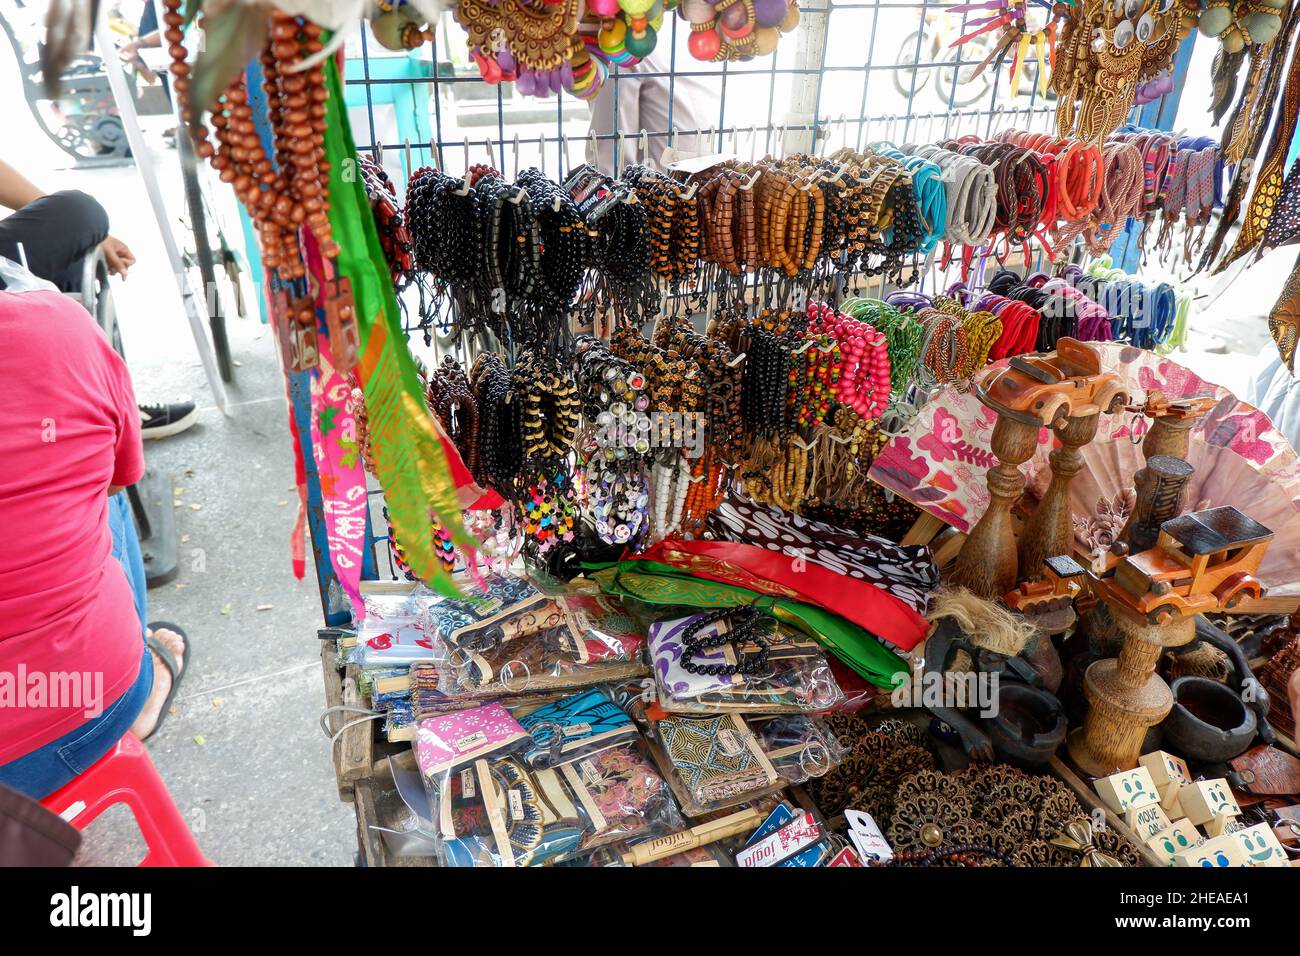 stall selling accessories on the sidewalk on Jalan Malioboro.  there are bracelets, bandanas, hair ties, prayer beads for worship and toy cars made of Stock Photo